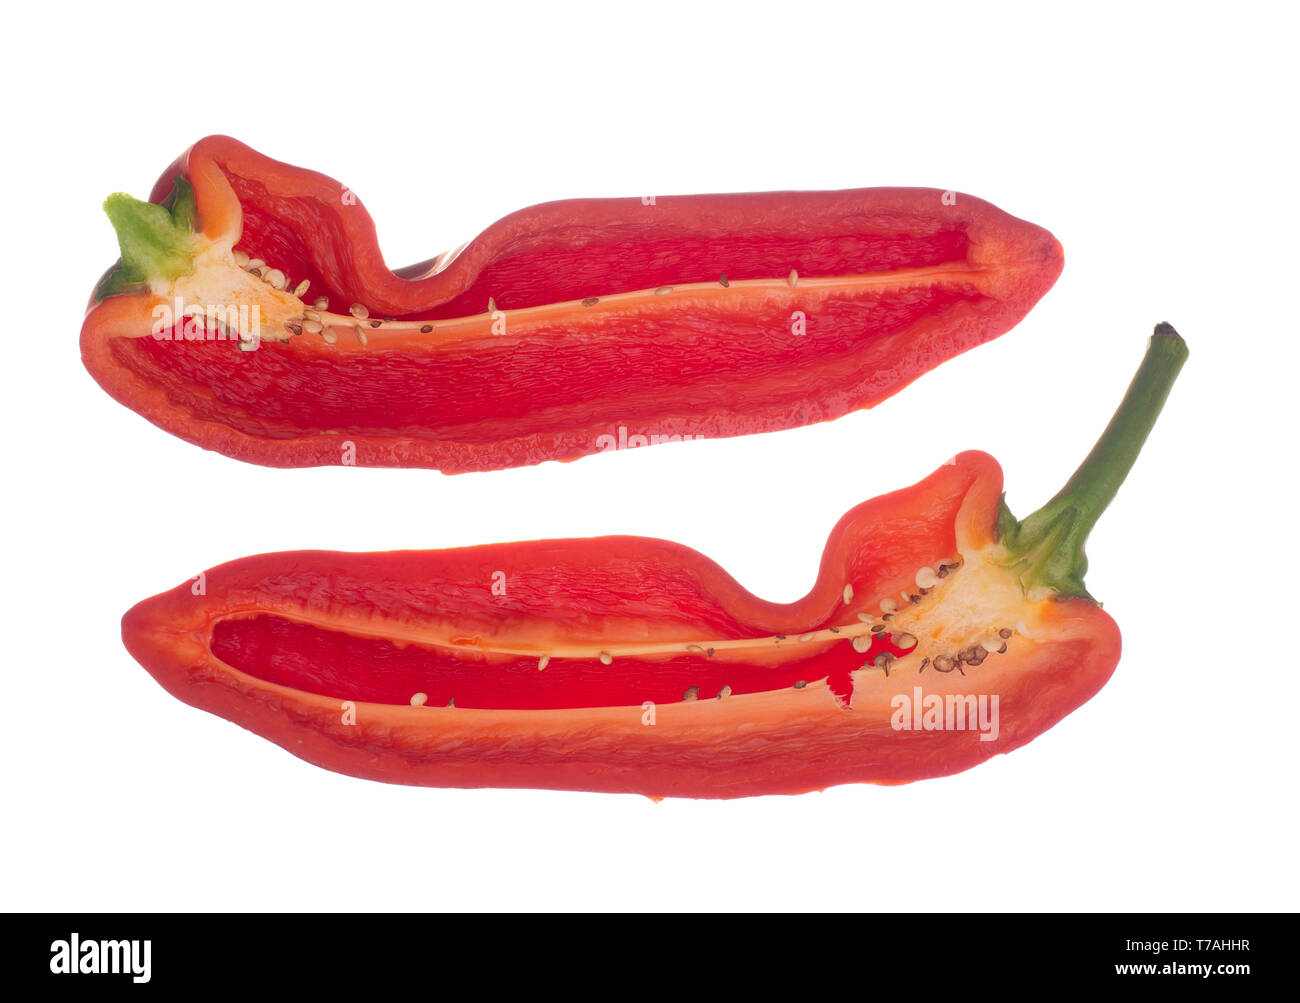 Red Cubanelle sweet pepper isolated on white background. Capsicum annuum.Cut open to reveal inside, seeds. Aka Italian frying pepper. Stock Photo